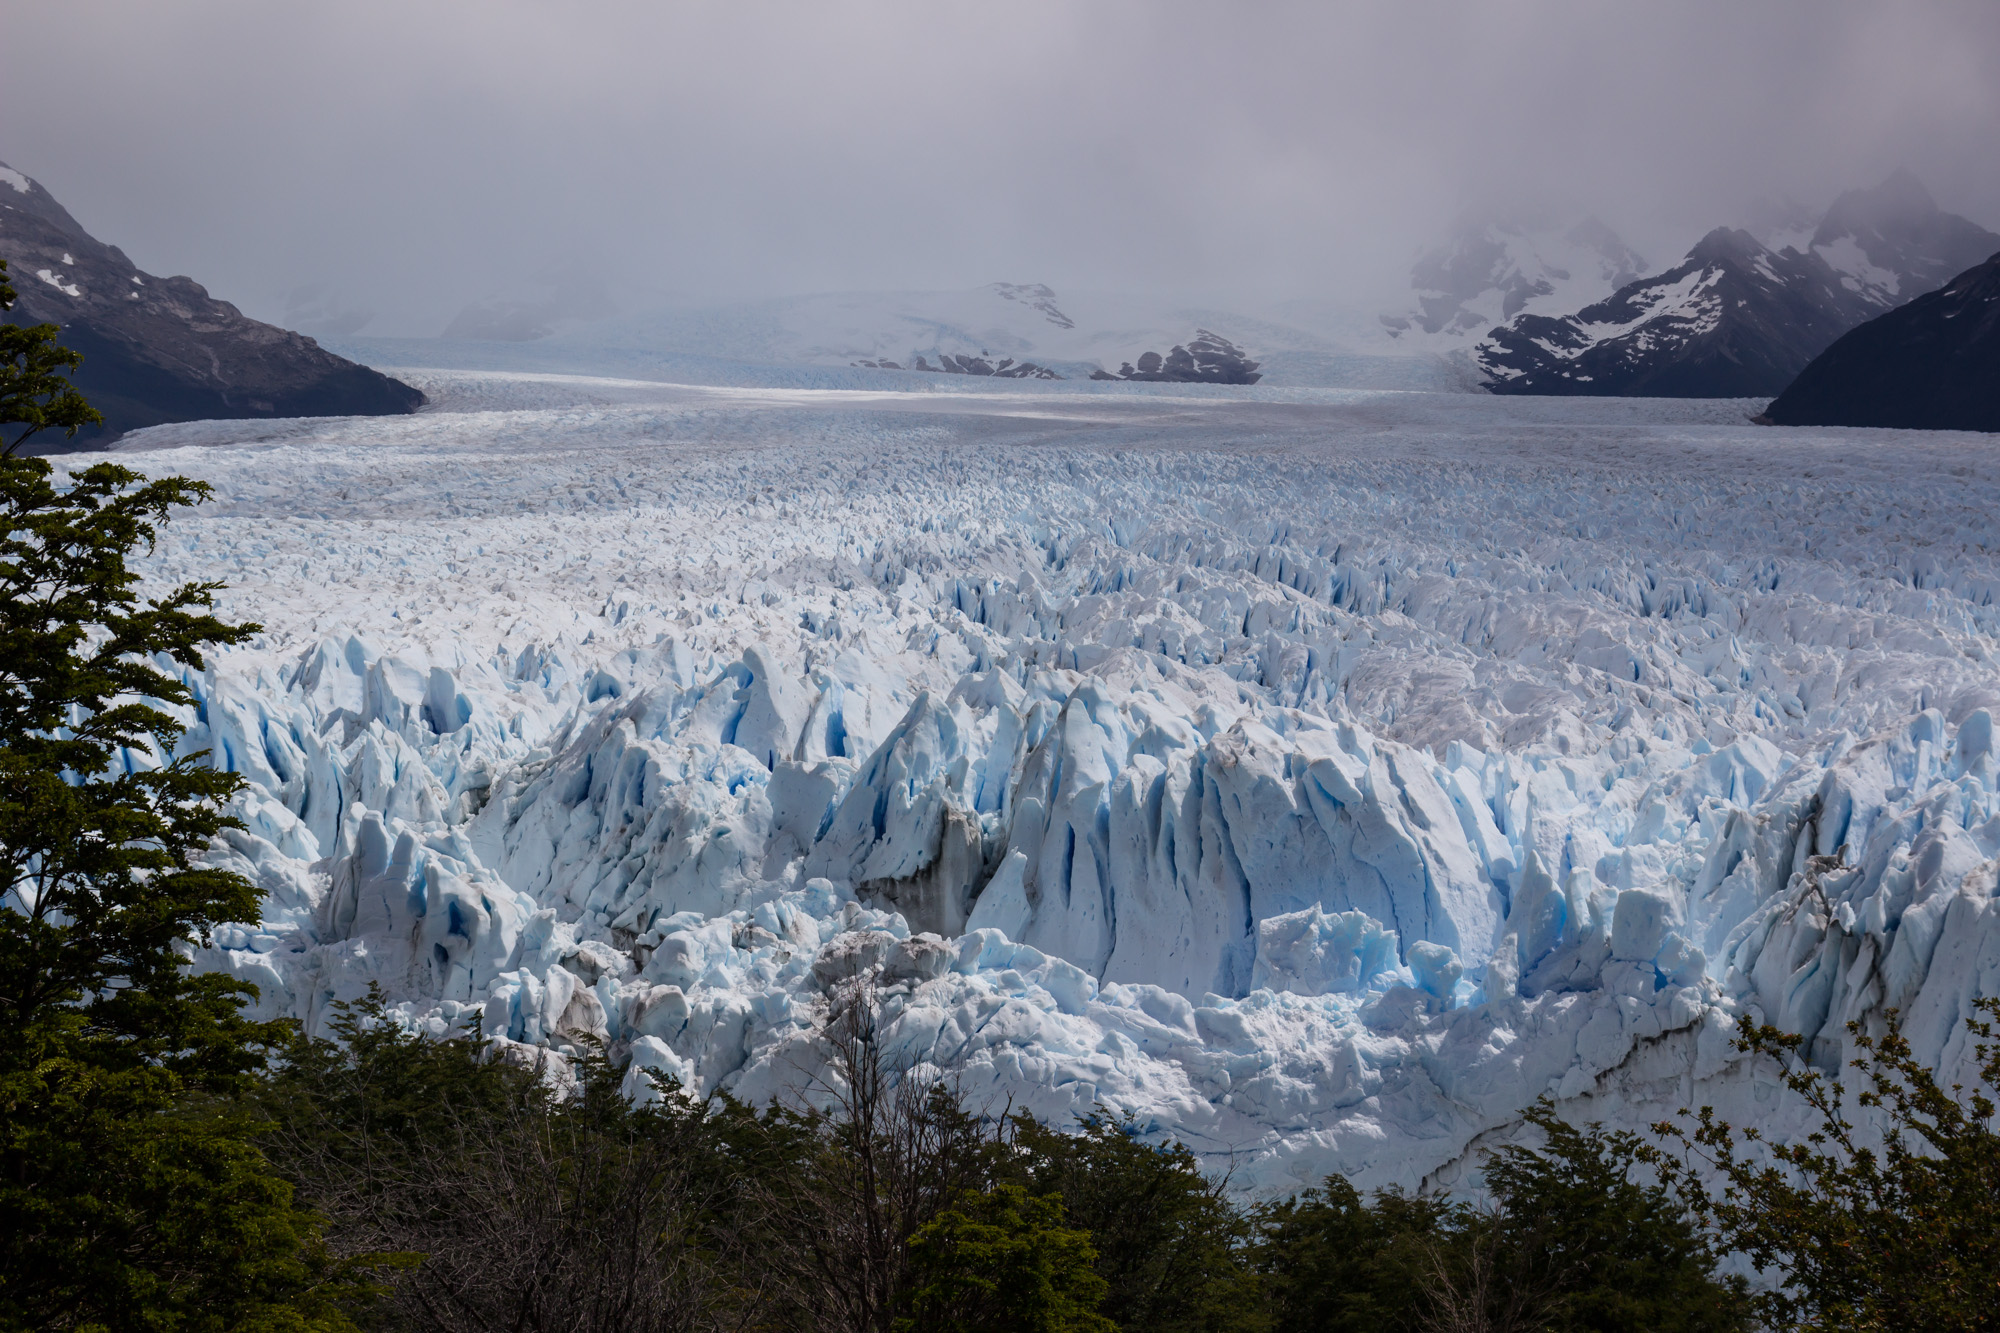 It's BIG! Dappled sunlight reveals the textures and intricacies of the monstrous Perito Moreno glacier 